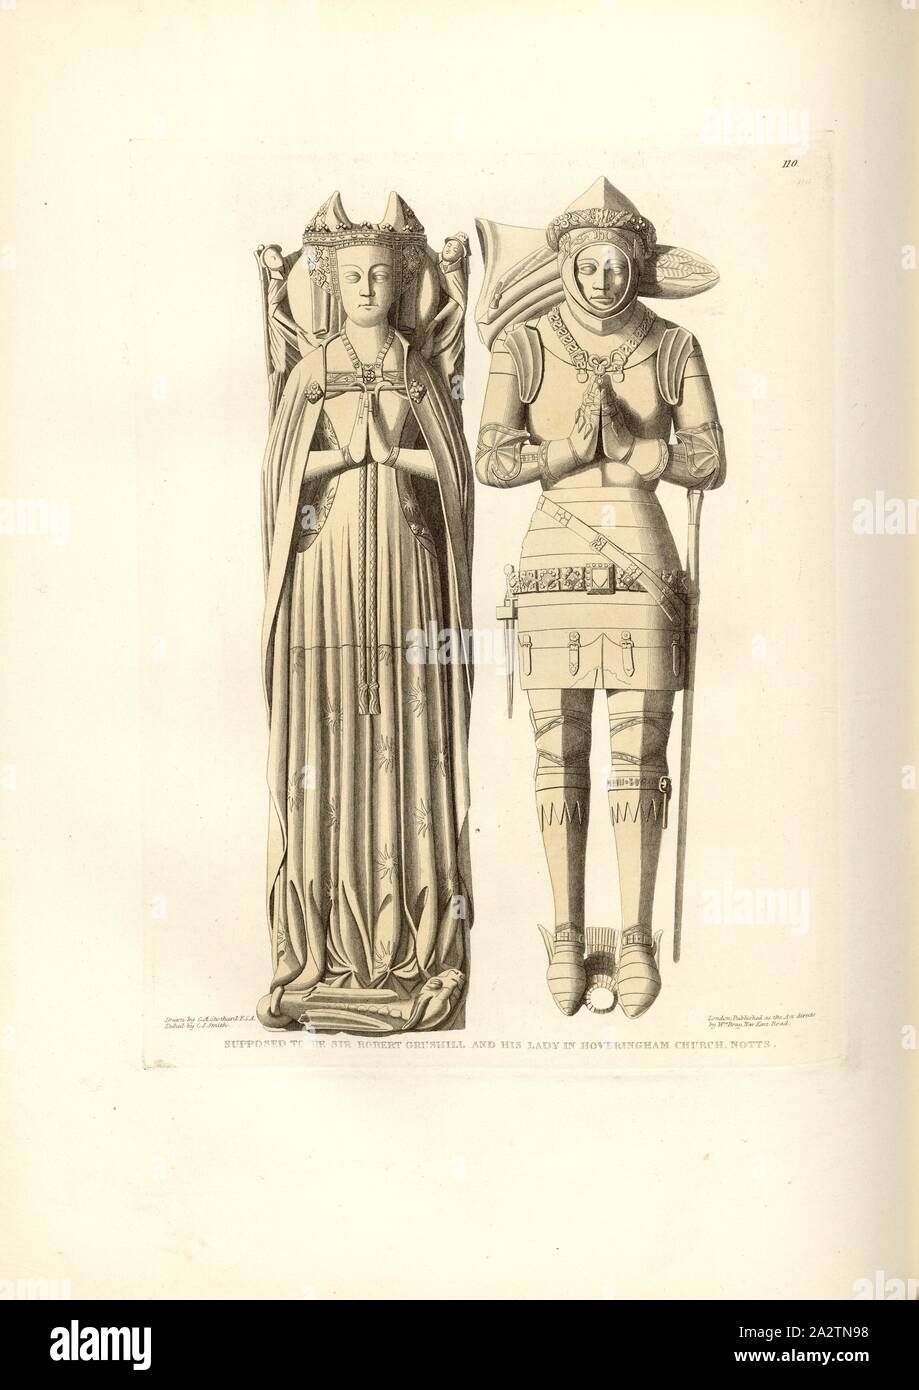 Supposed to be Sir Robert Grushill and his Lady in Hoveringham Church, Notts, Tomb in the St Michael Church in Hoveringham, signed: Drawn by C. A. Stothard; Etched by C.J. Smith; Published by Mrs. Bray, Fig. 122, 110, after p. 84, Stothard, Charles Alfred (drawn); Smith, C. J. (etched); Bray, E. (publ.), Charles Alfred Stothard, Alfred John Kempe: The monumental effigies of Great Britain: selected from our cathedrals and churches, for the purpose of bringing together, and preserving correct representations of the best historical illustrations extant, from the Norman conquest to the reign of Stock Photo